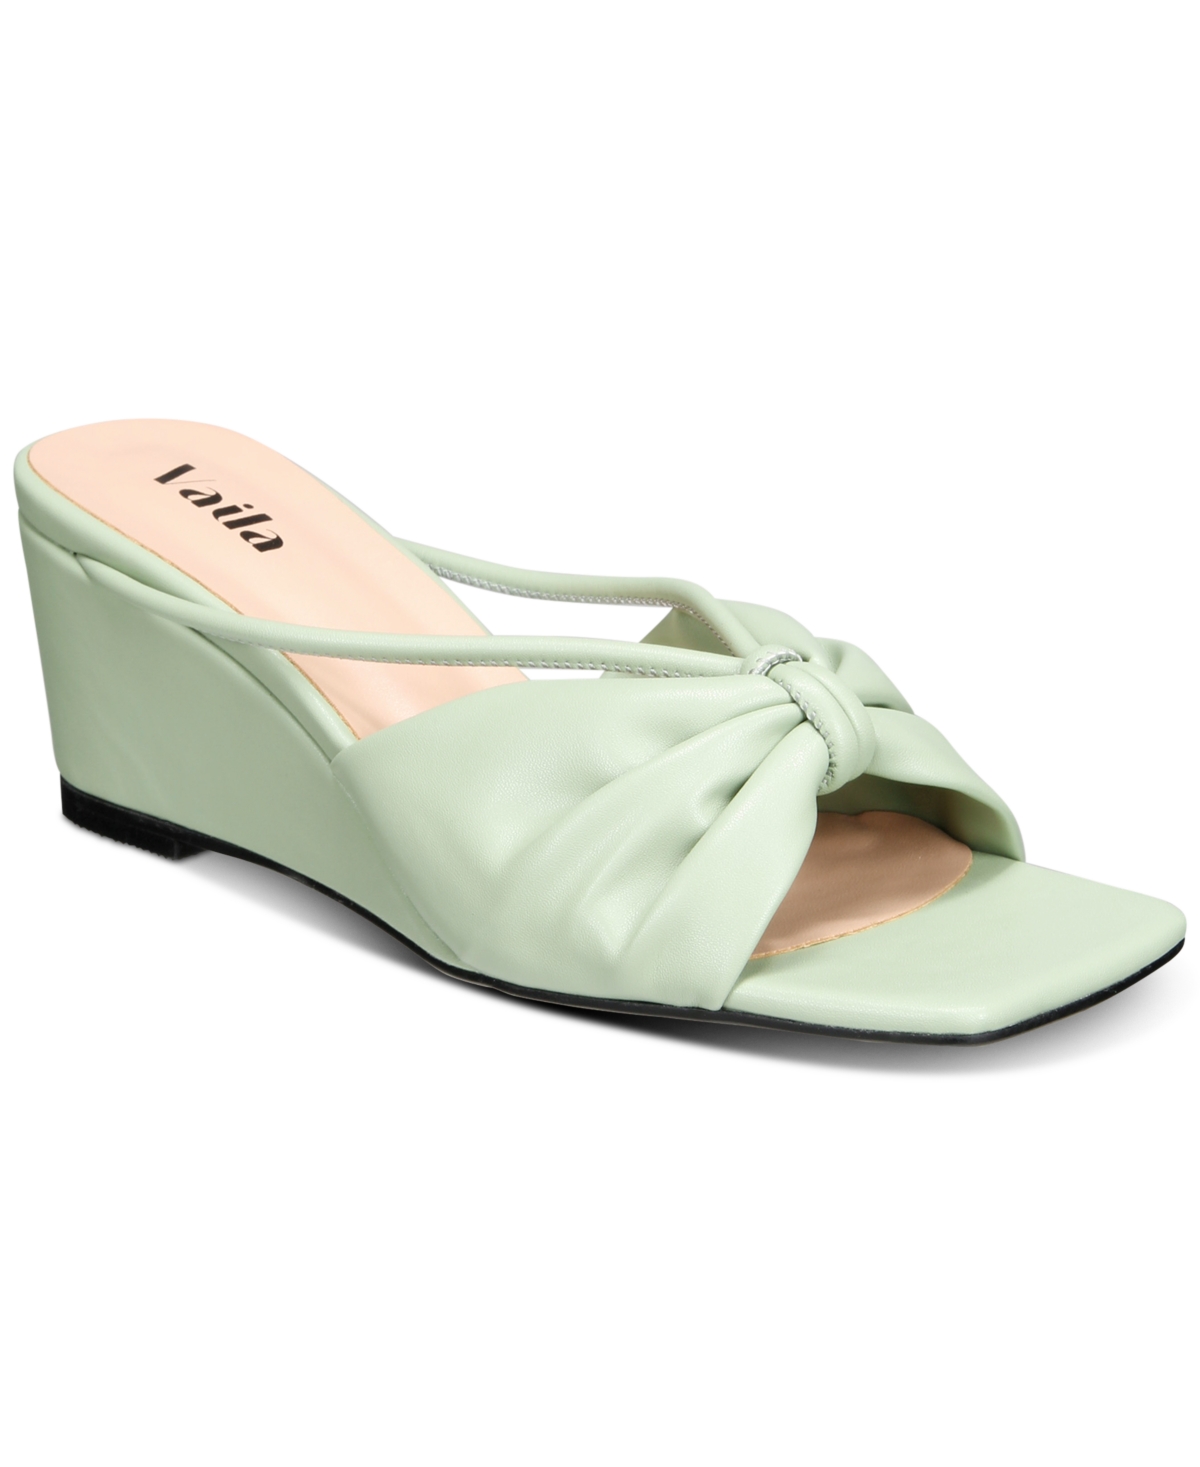 Women's Olivia Knotted Slide Wedge Sandals - Green Leather